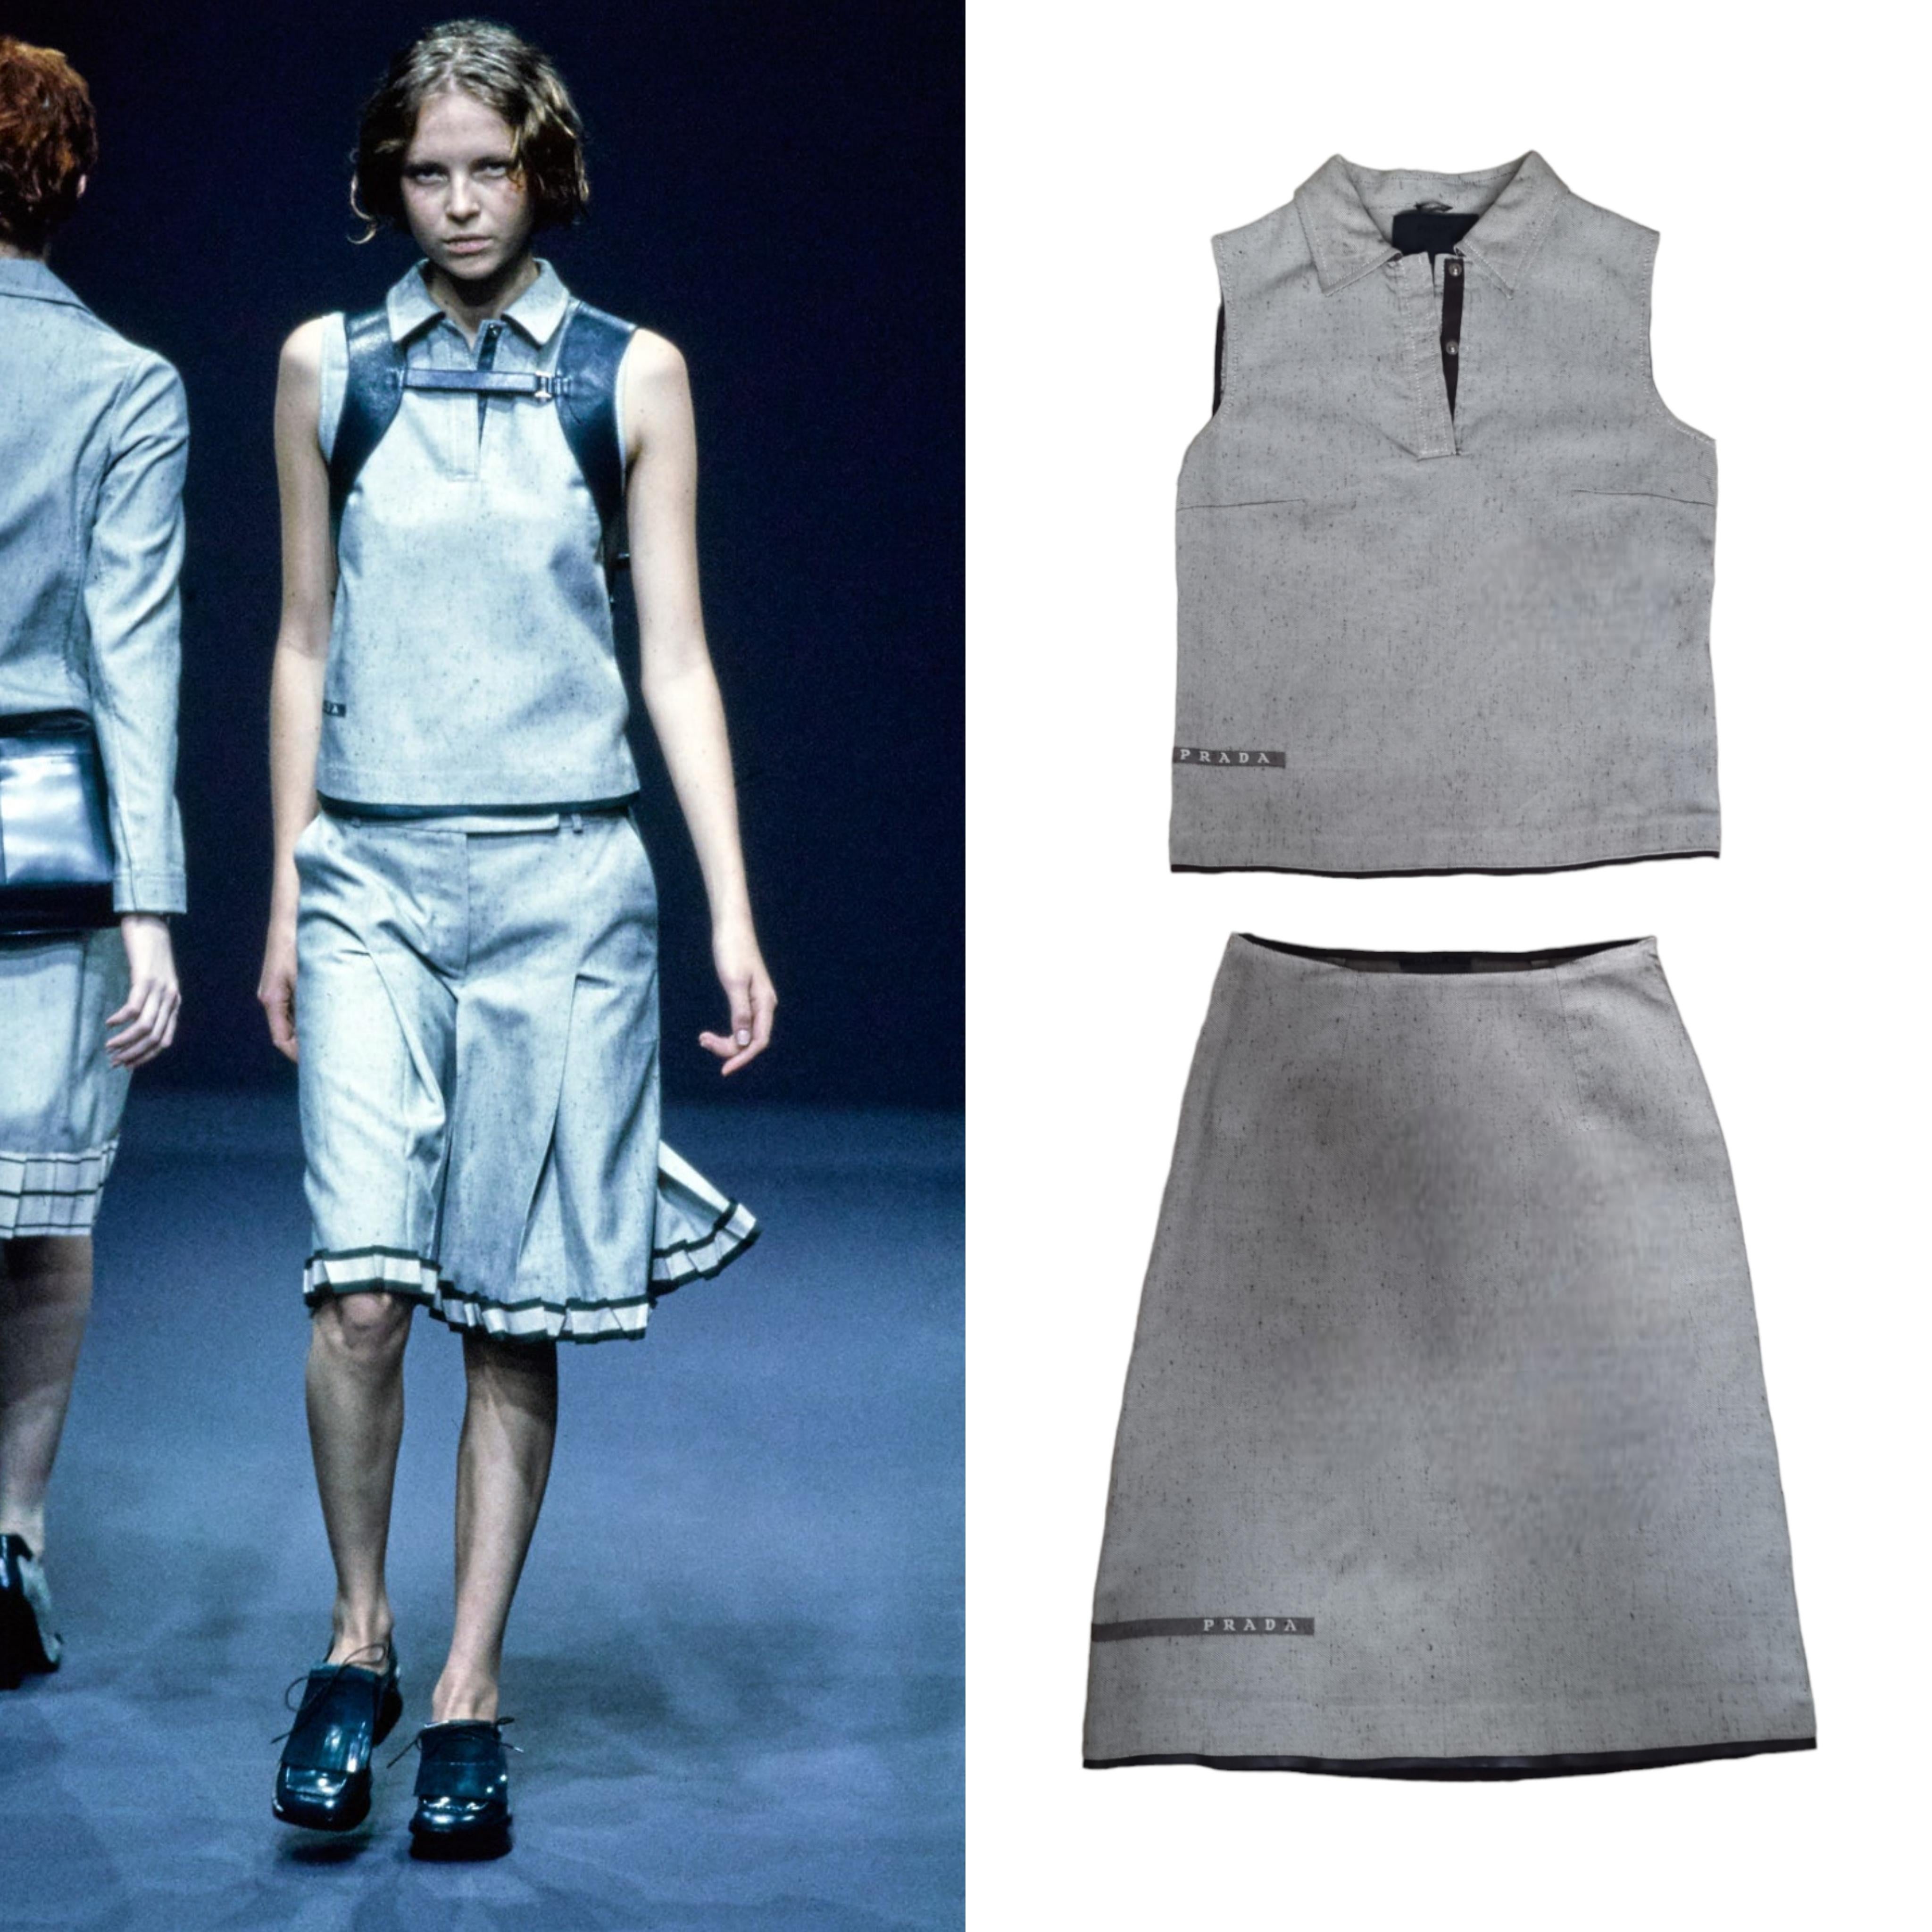  Grey linen skirt set from the Prada SS 1999 collection as featured in the show.

Leather trim

Snap button closure

Side zip of skirt and top

Size: Top: Size 40, skirt size 42 - no stretch size runs lower fits lower an XS

Material: Cotton,